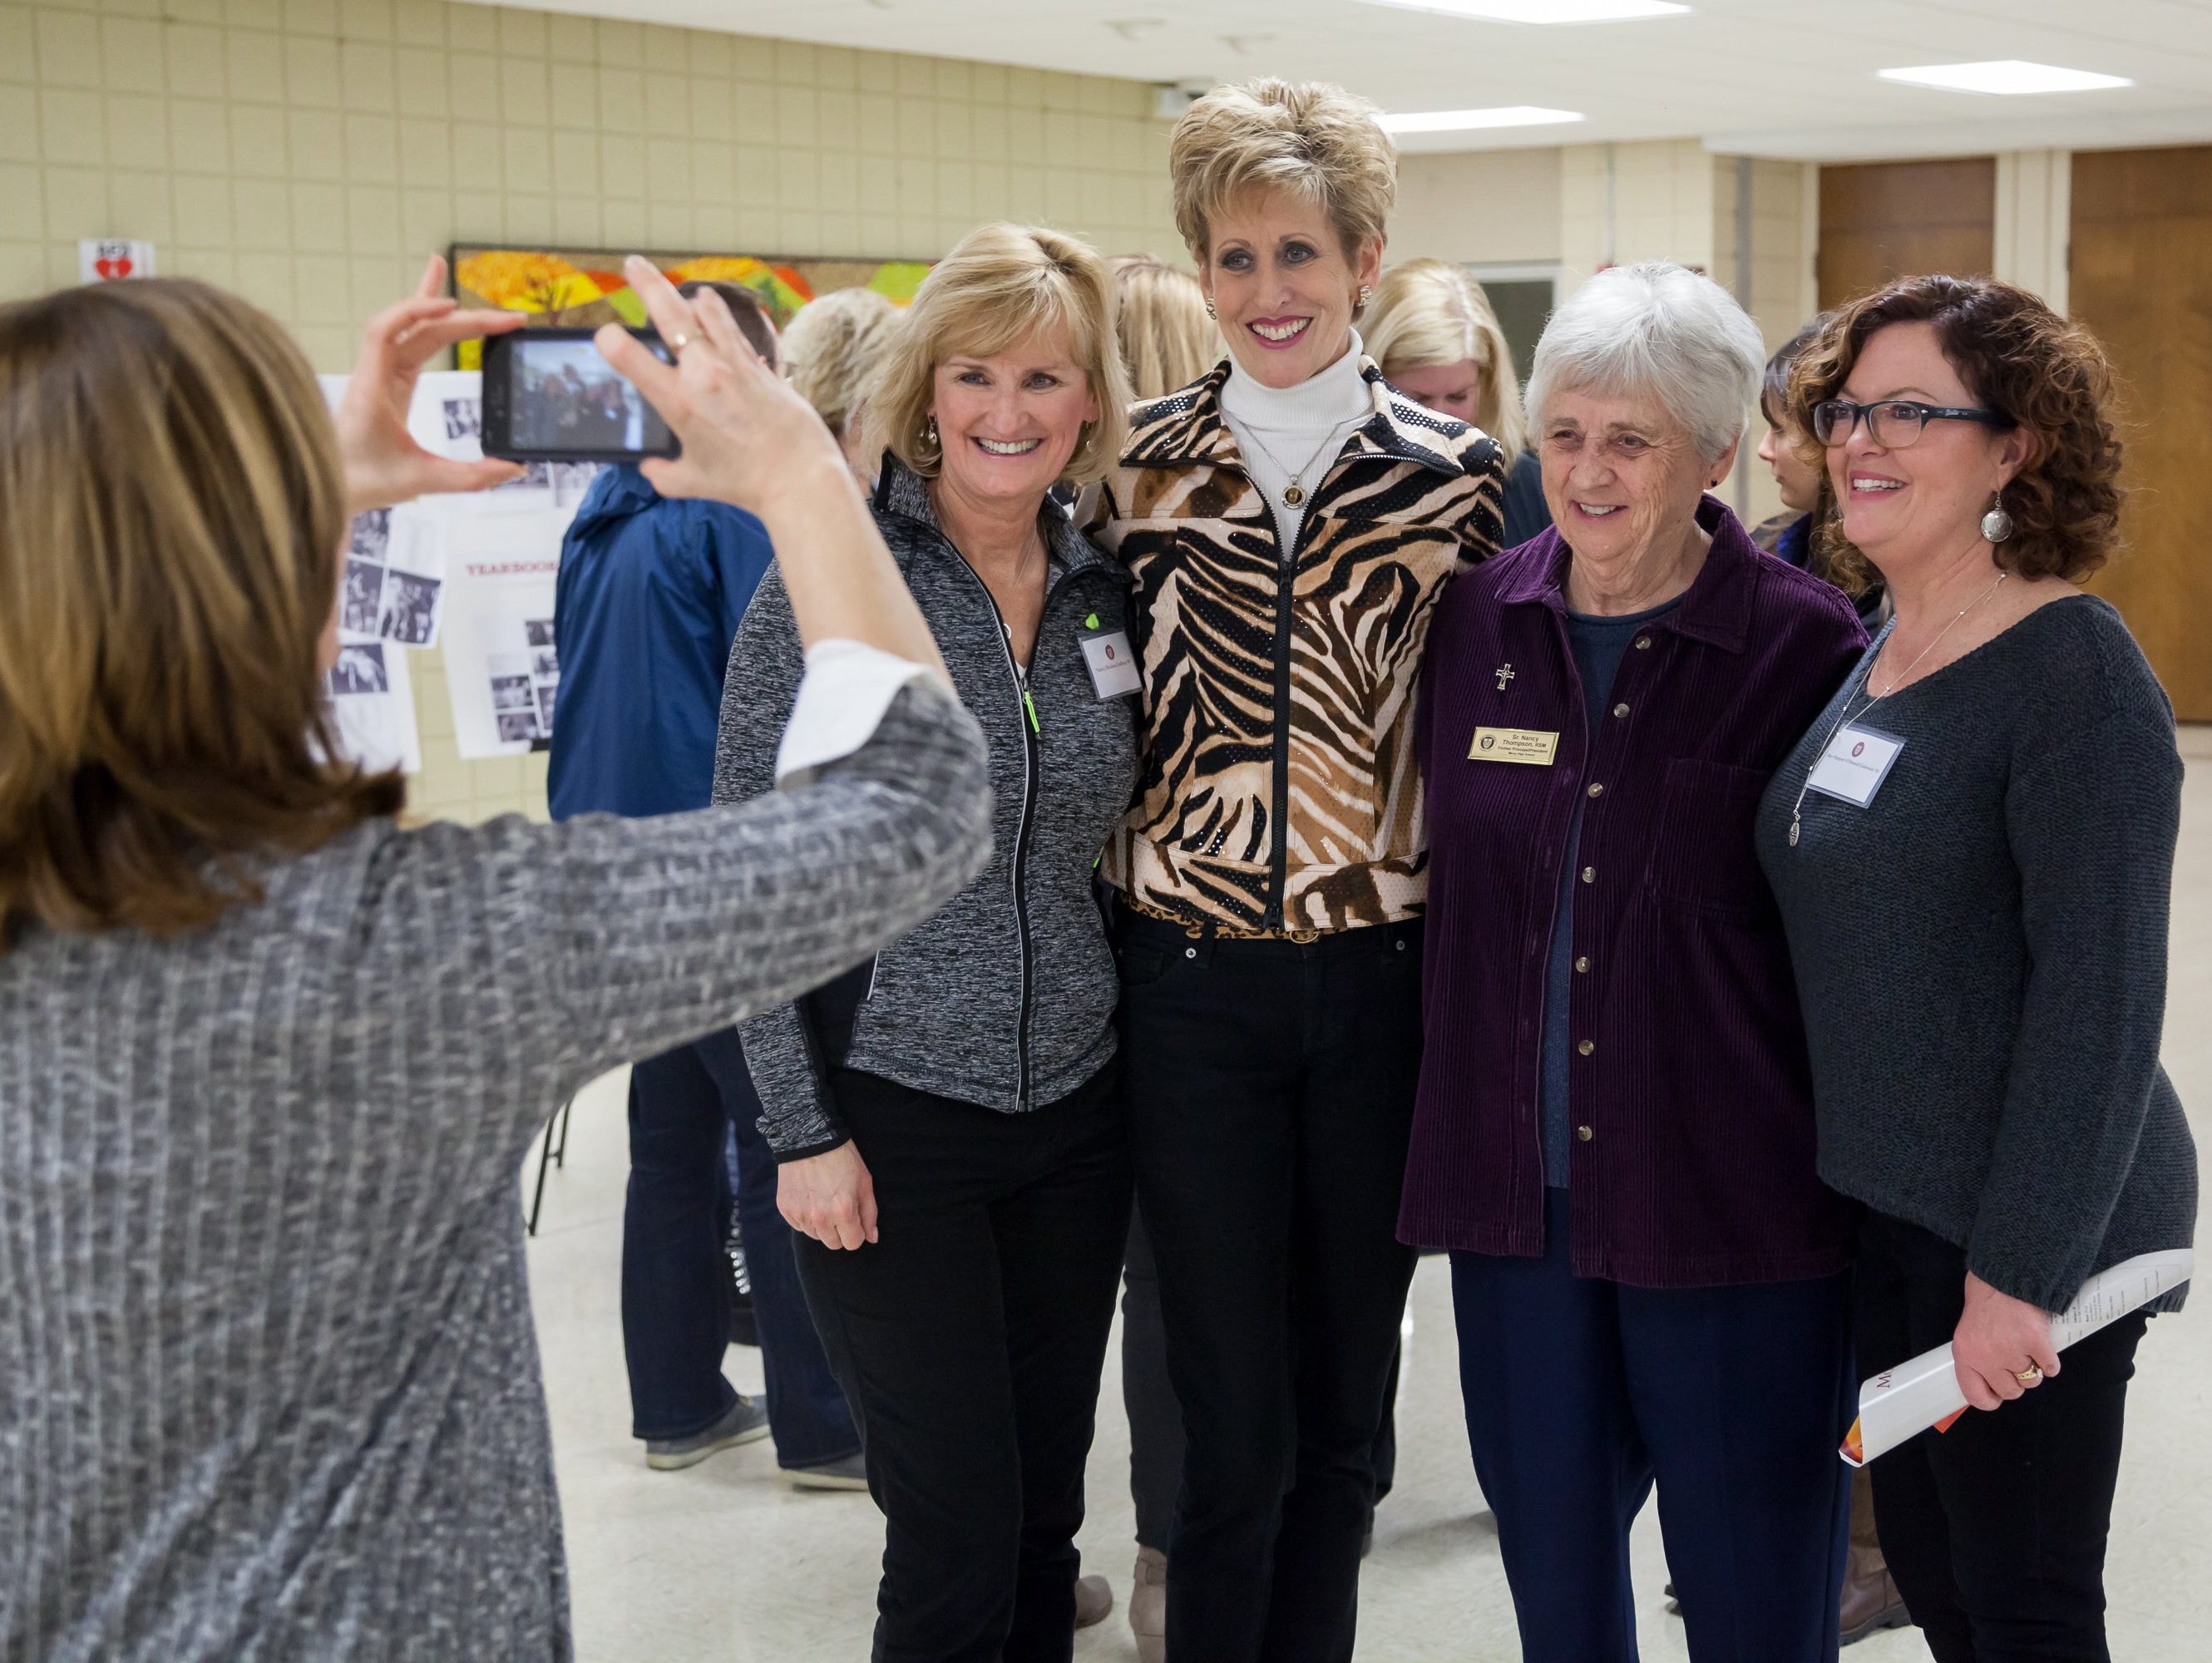 Friends, family and faculty joined in the celebration of Mercy High School’s 1977 and 1982 state championship basketball teams at Farmington Hills Mercy on Friday, Jan. 8, 2016.